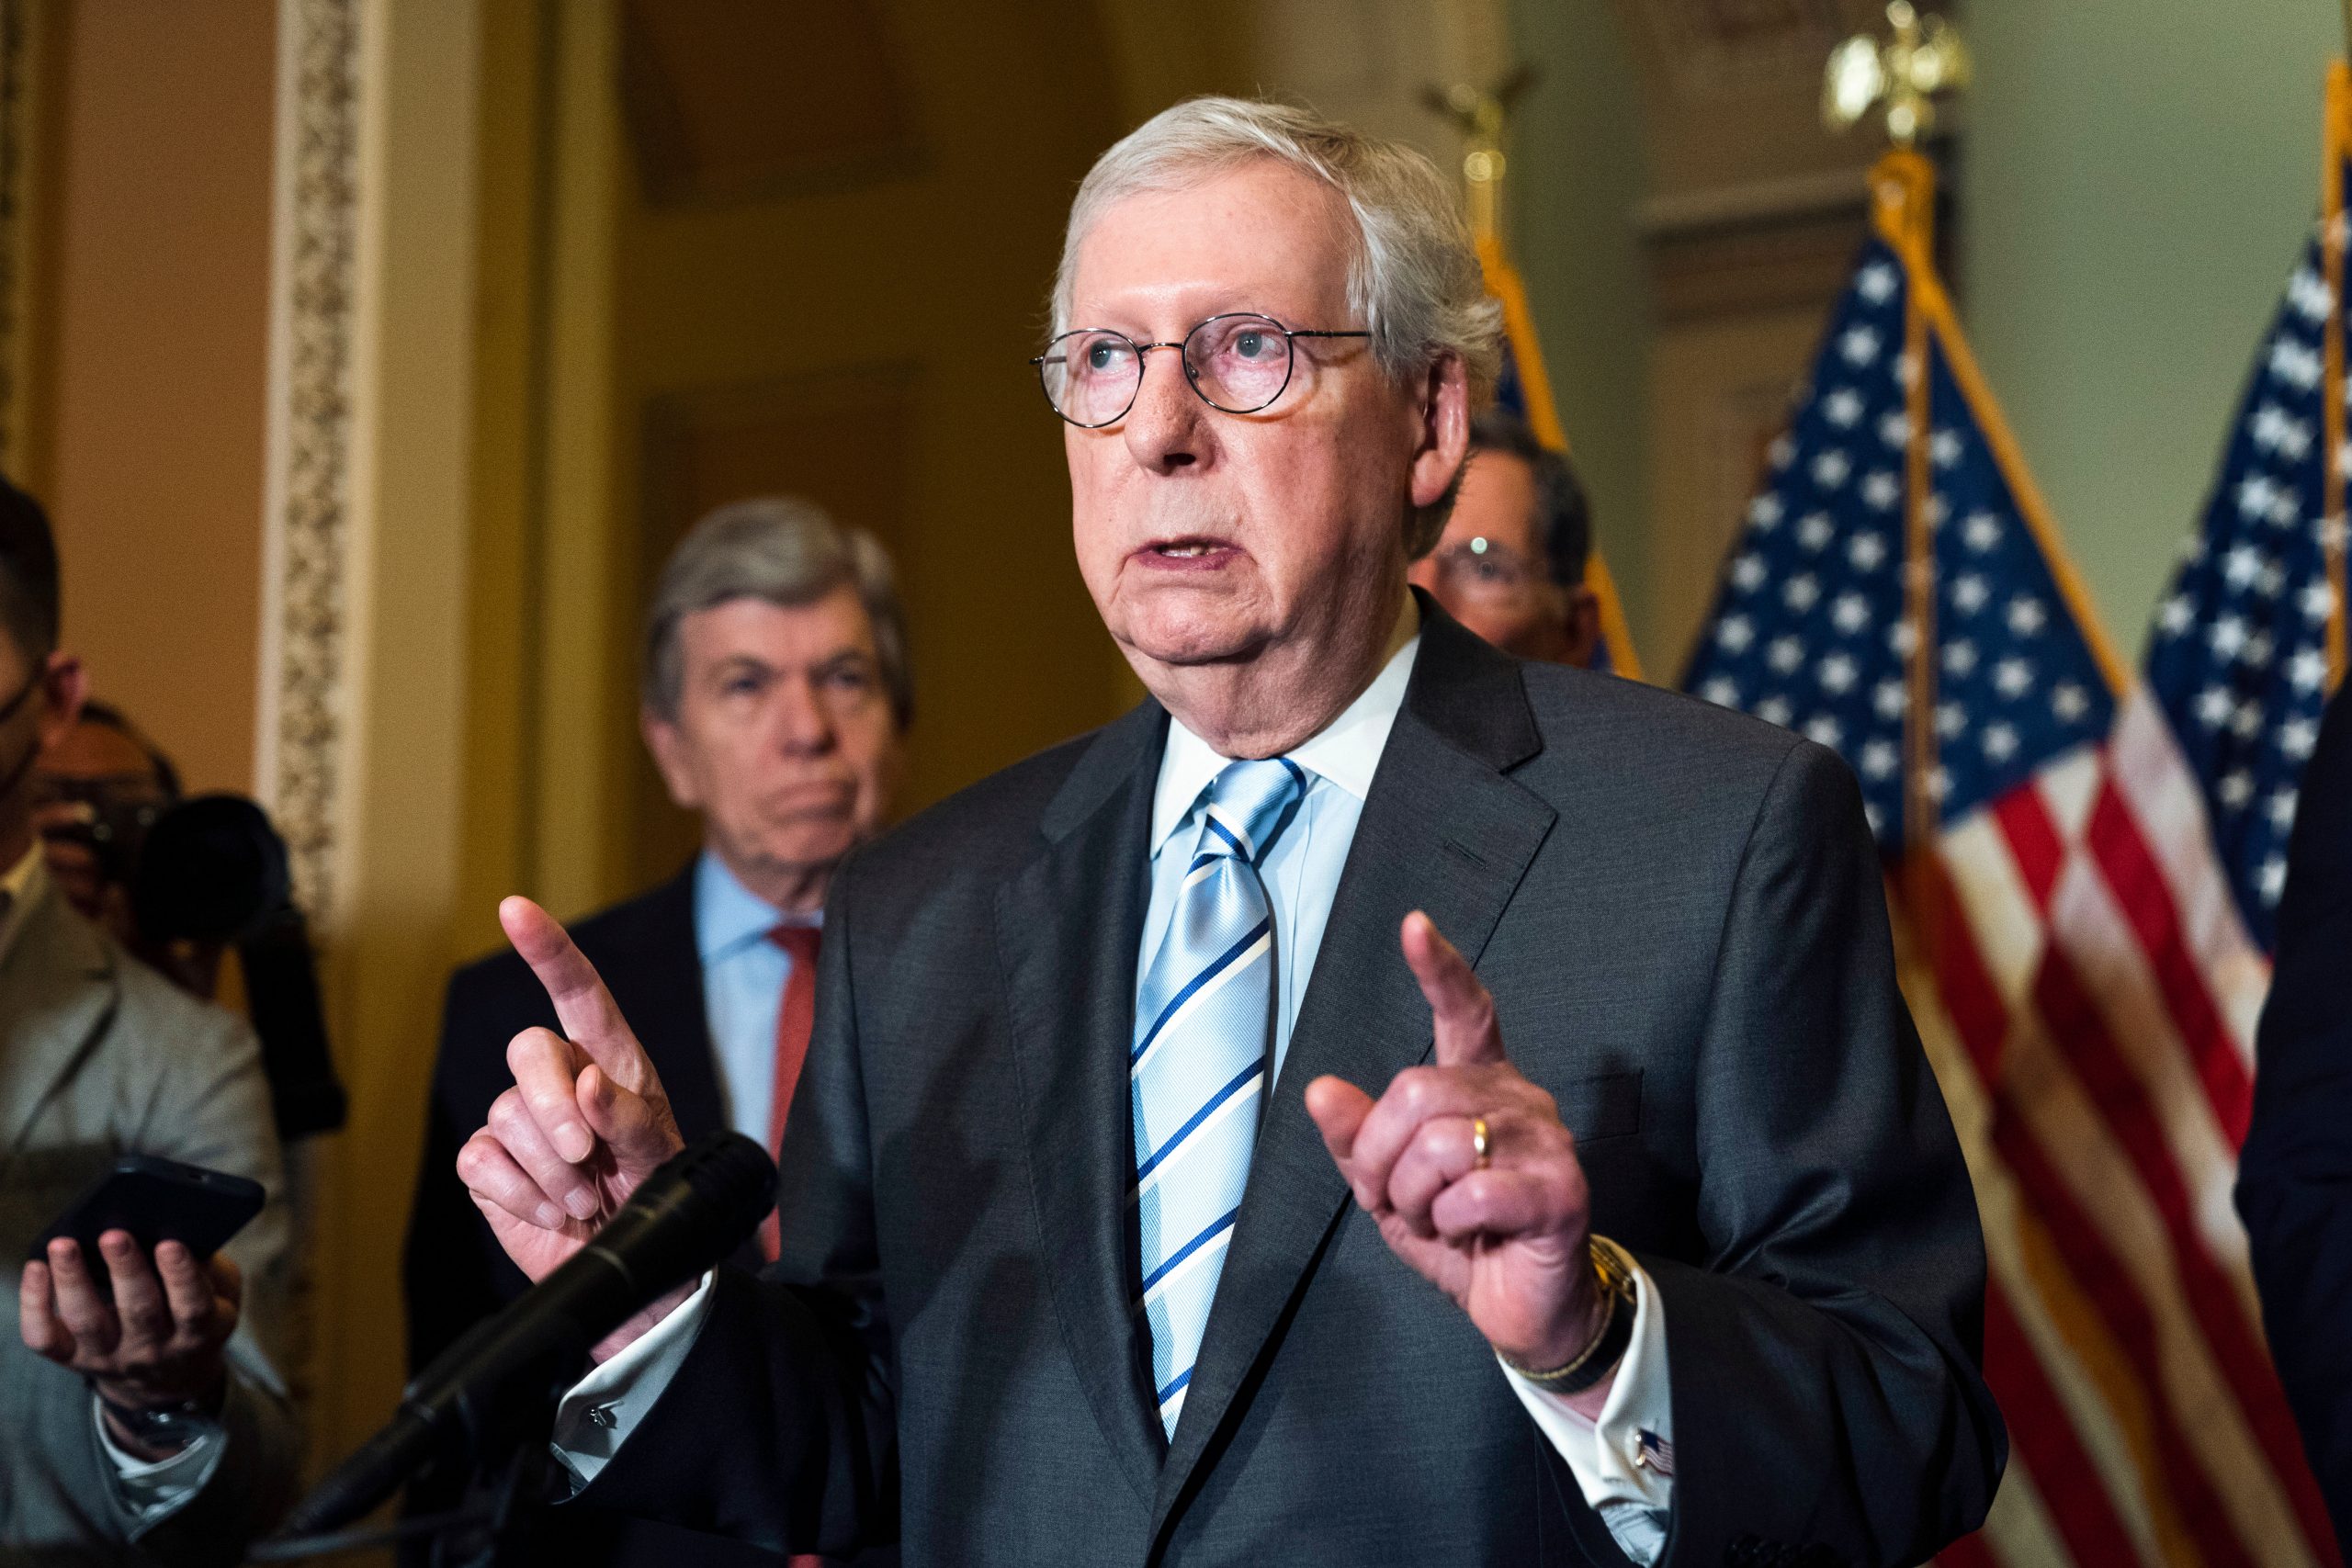 Mitch McConnell ‘supportive’ of bipartisan gun law: Why it matters